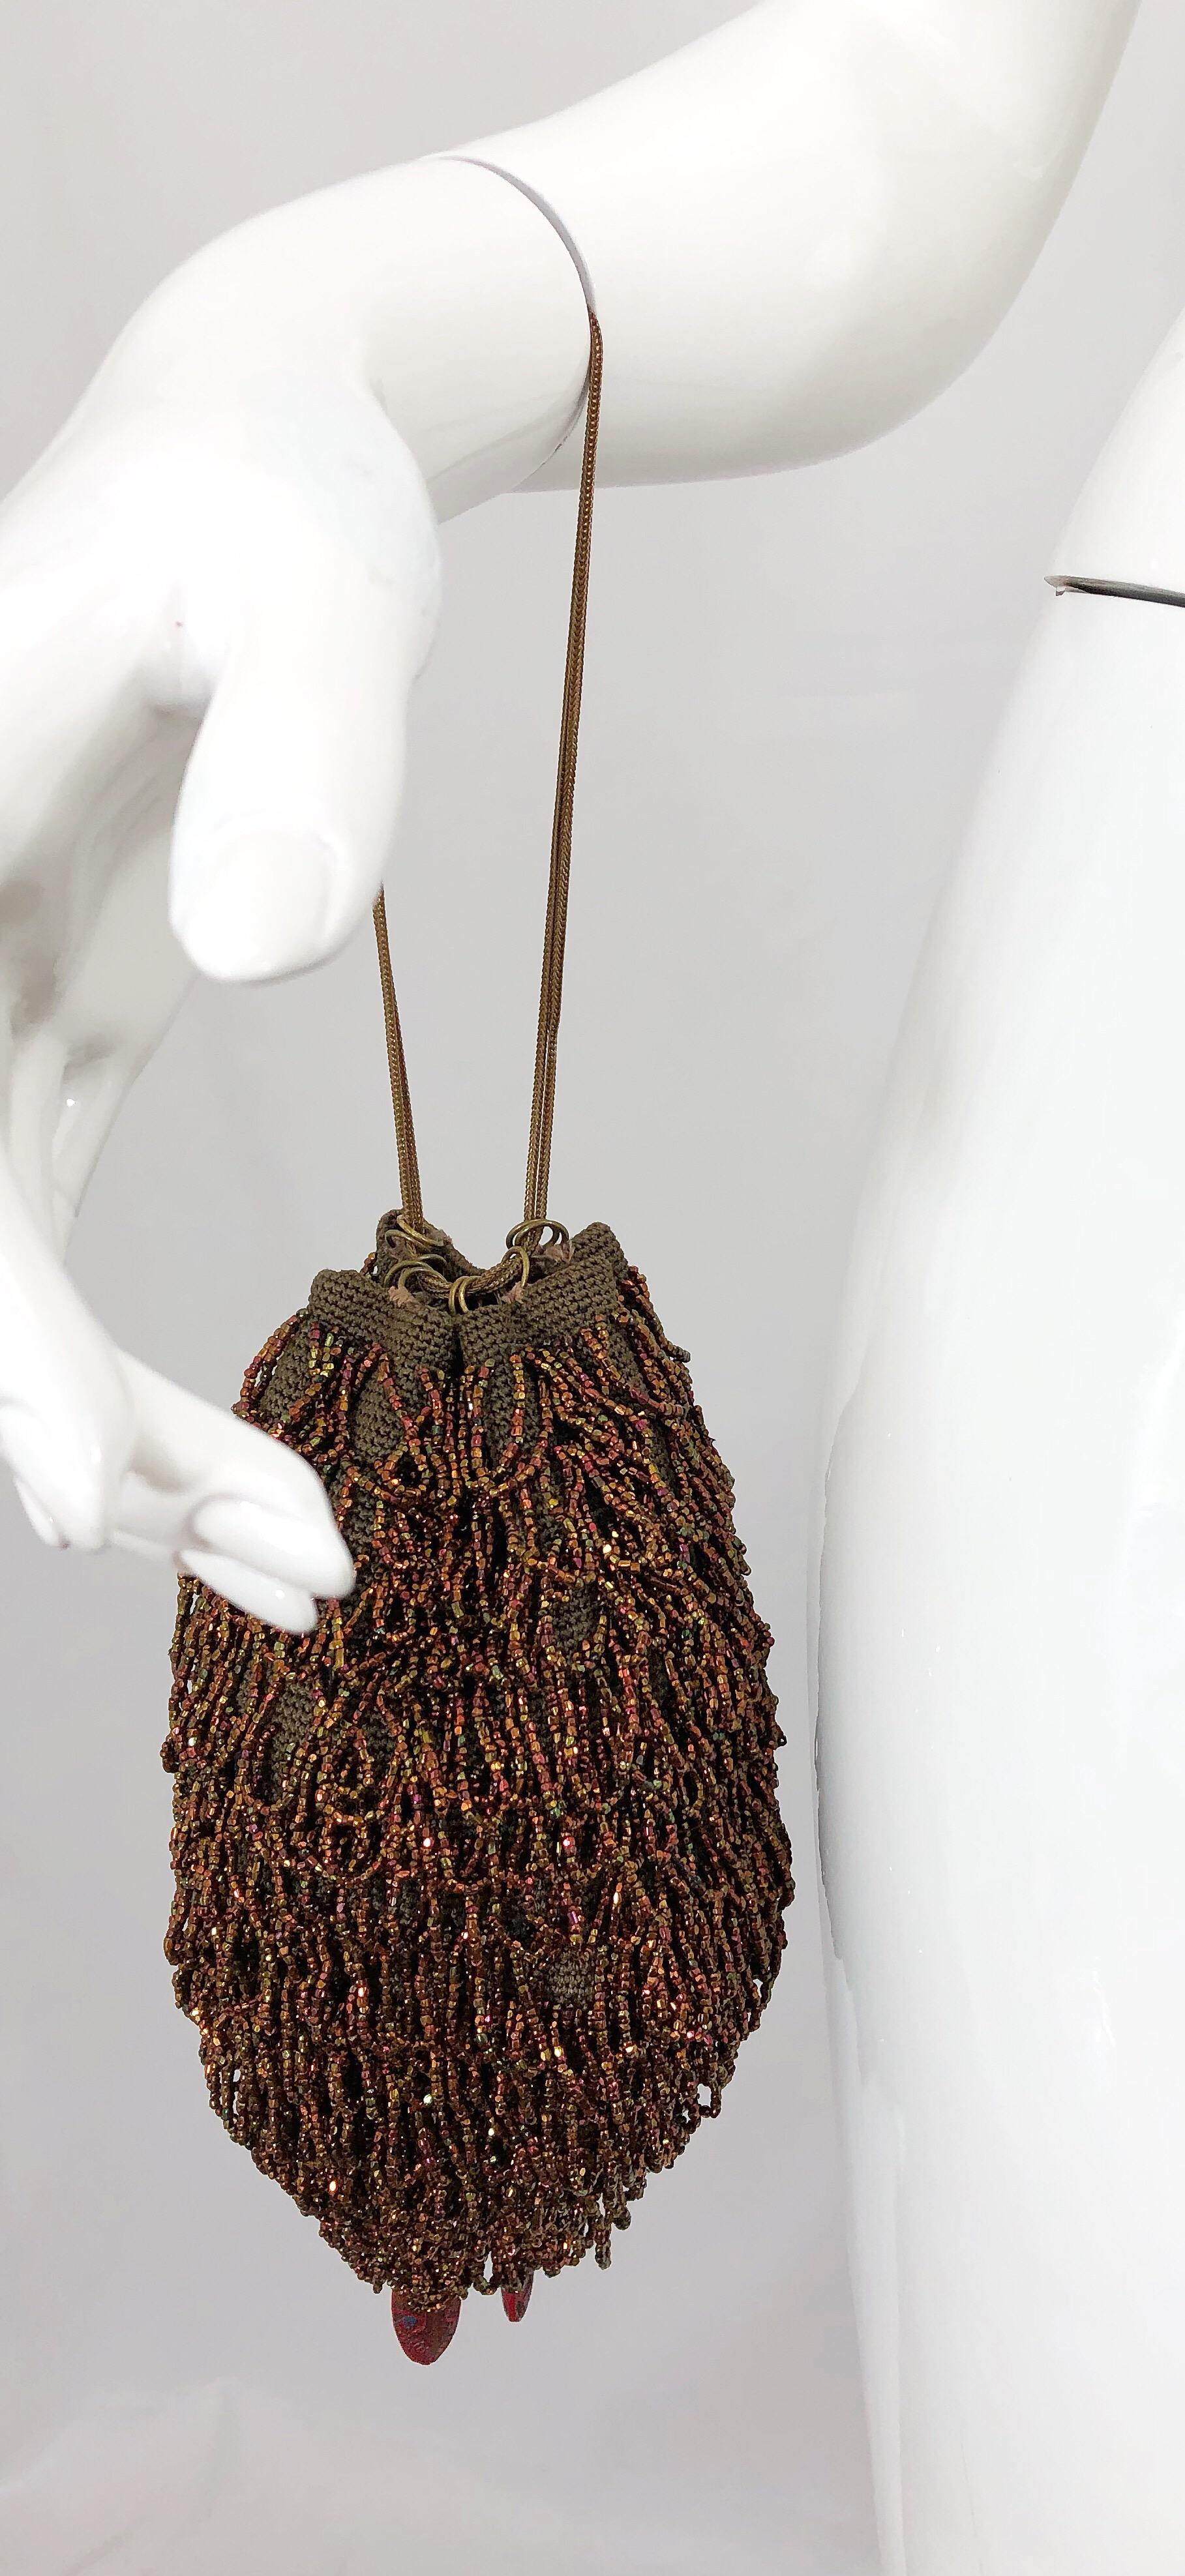 Beautiful 1920s bronze and brown fully beaded evening bag! The perfect alternative to a clutch! This rare gem features two gold metal chains, and can be adjusted to wear long or short. The perfect size that can easily fit a smartphone, some makeup